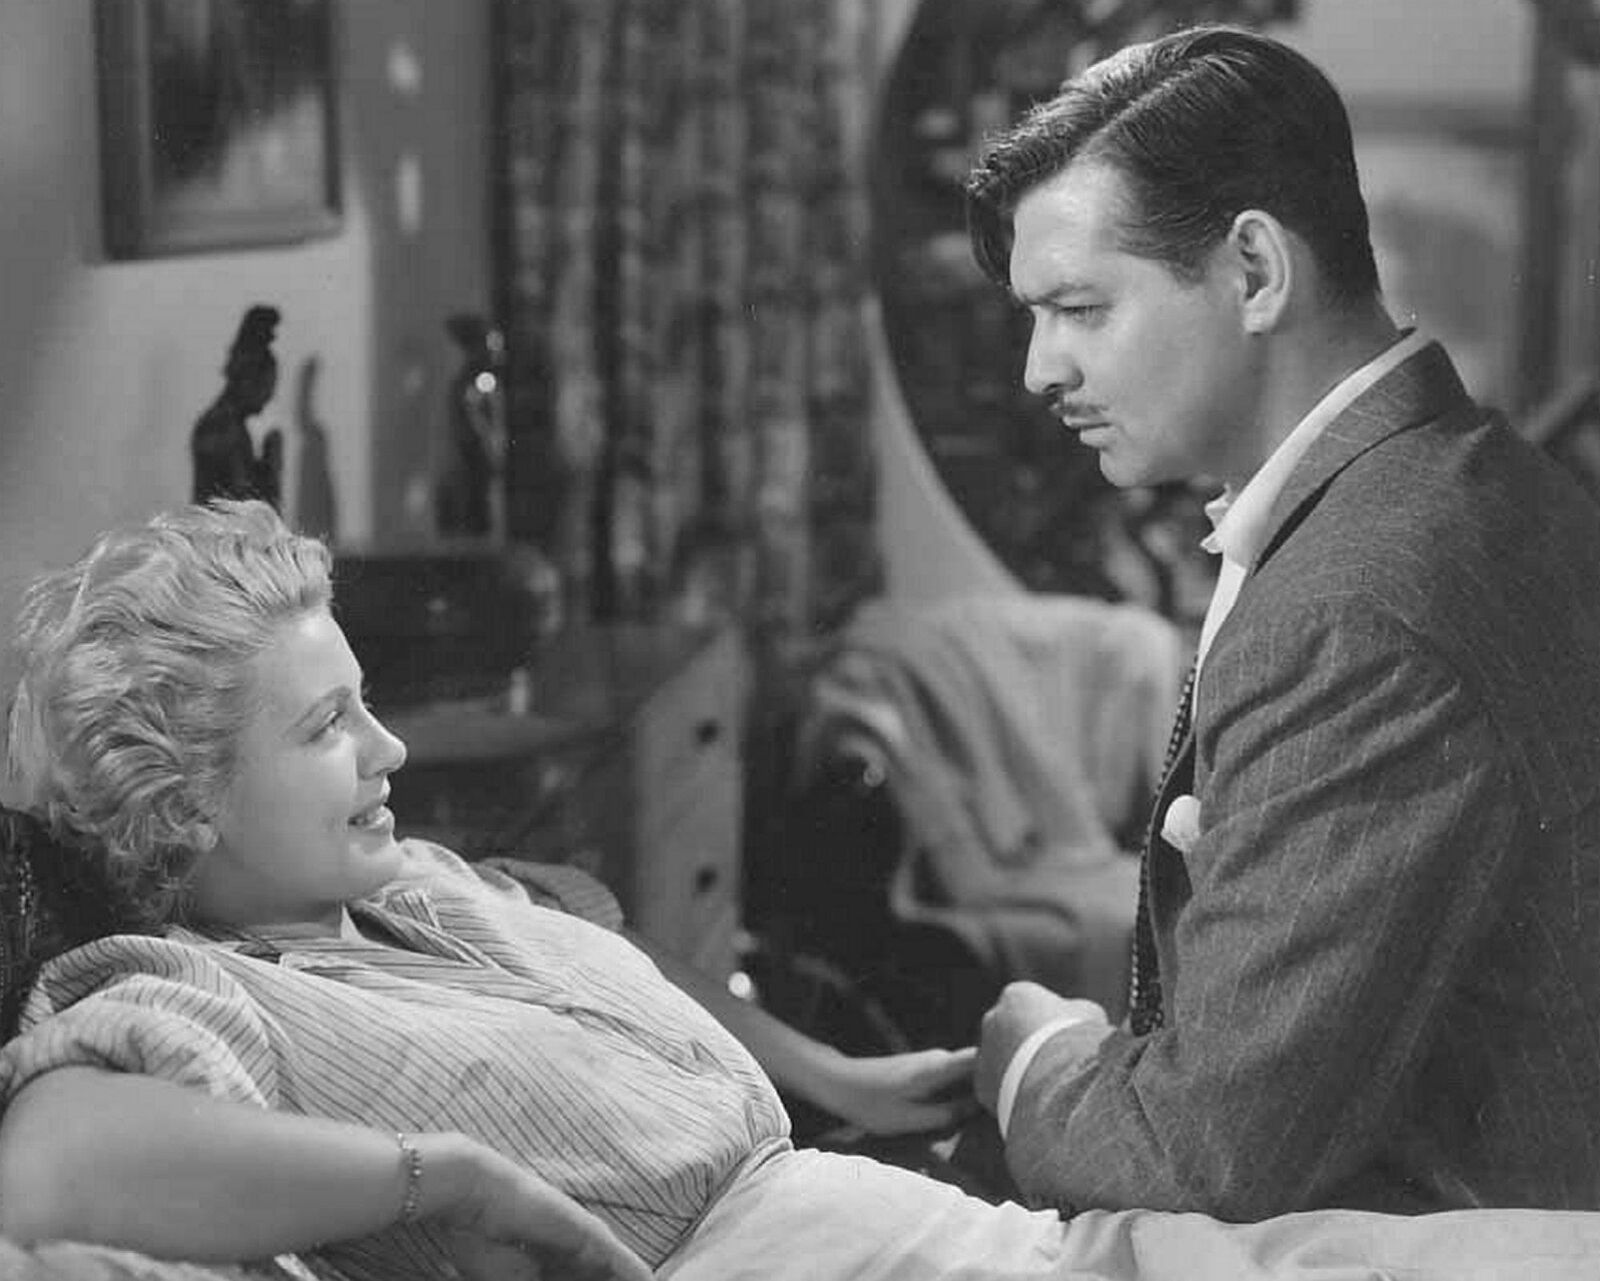 1942 LANA TURNER & CLARK GABLE in SOMEWHERE I'LL FIND YOU Photo (204-M)